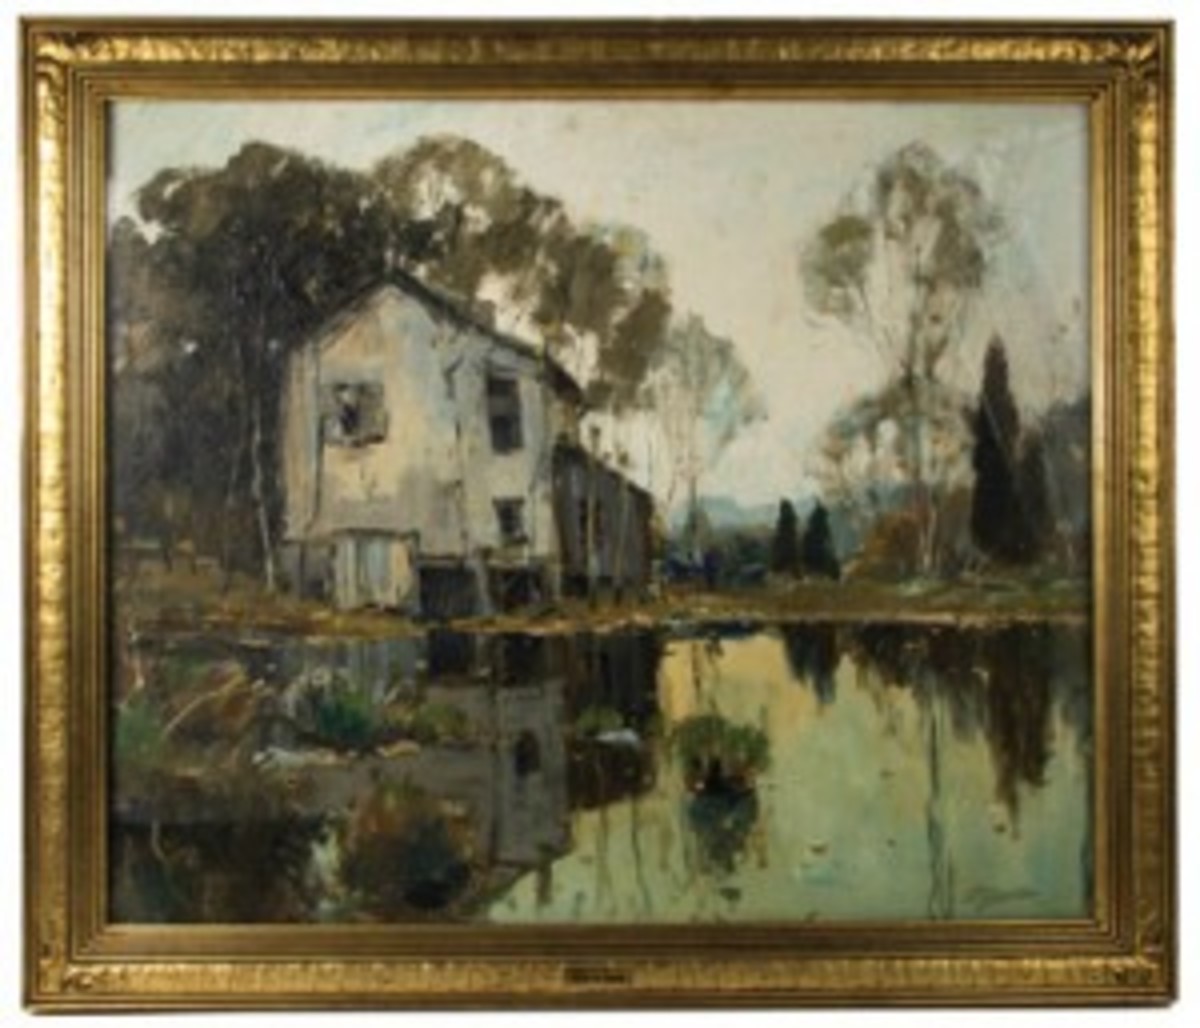 "Mill in Connecticut"